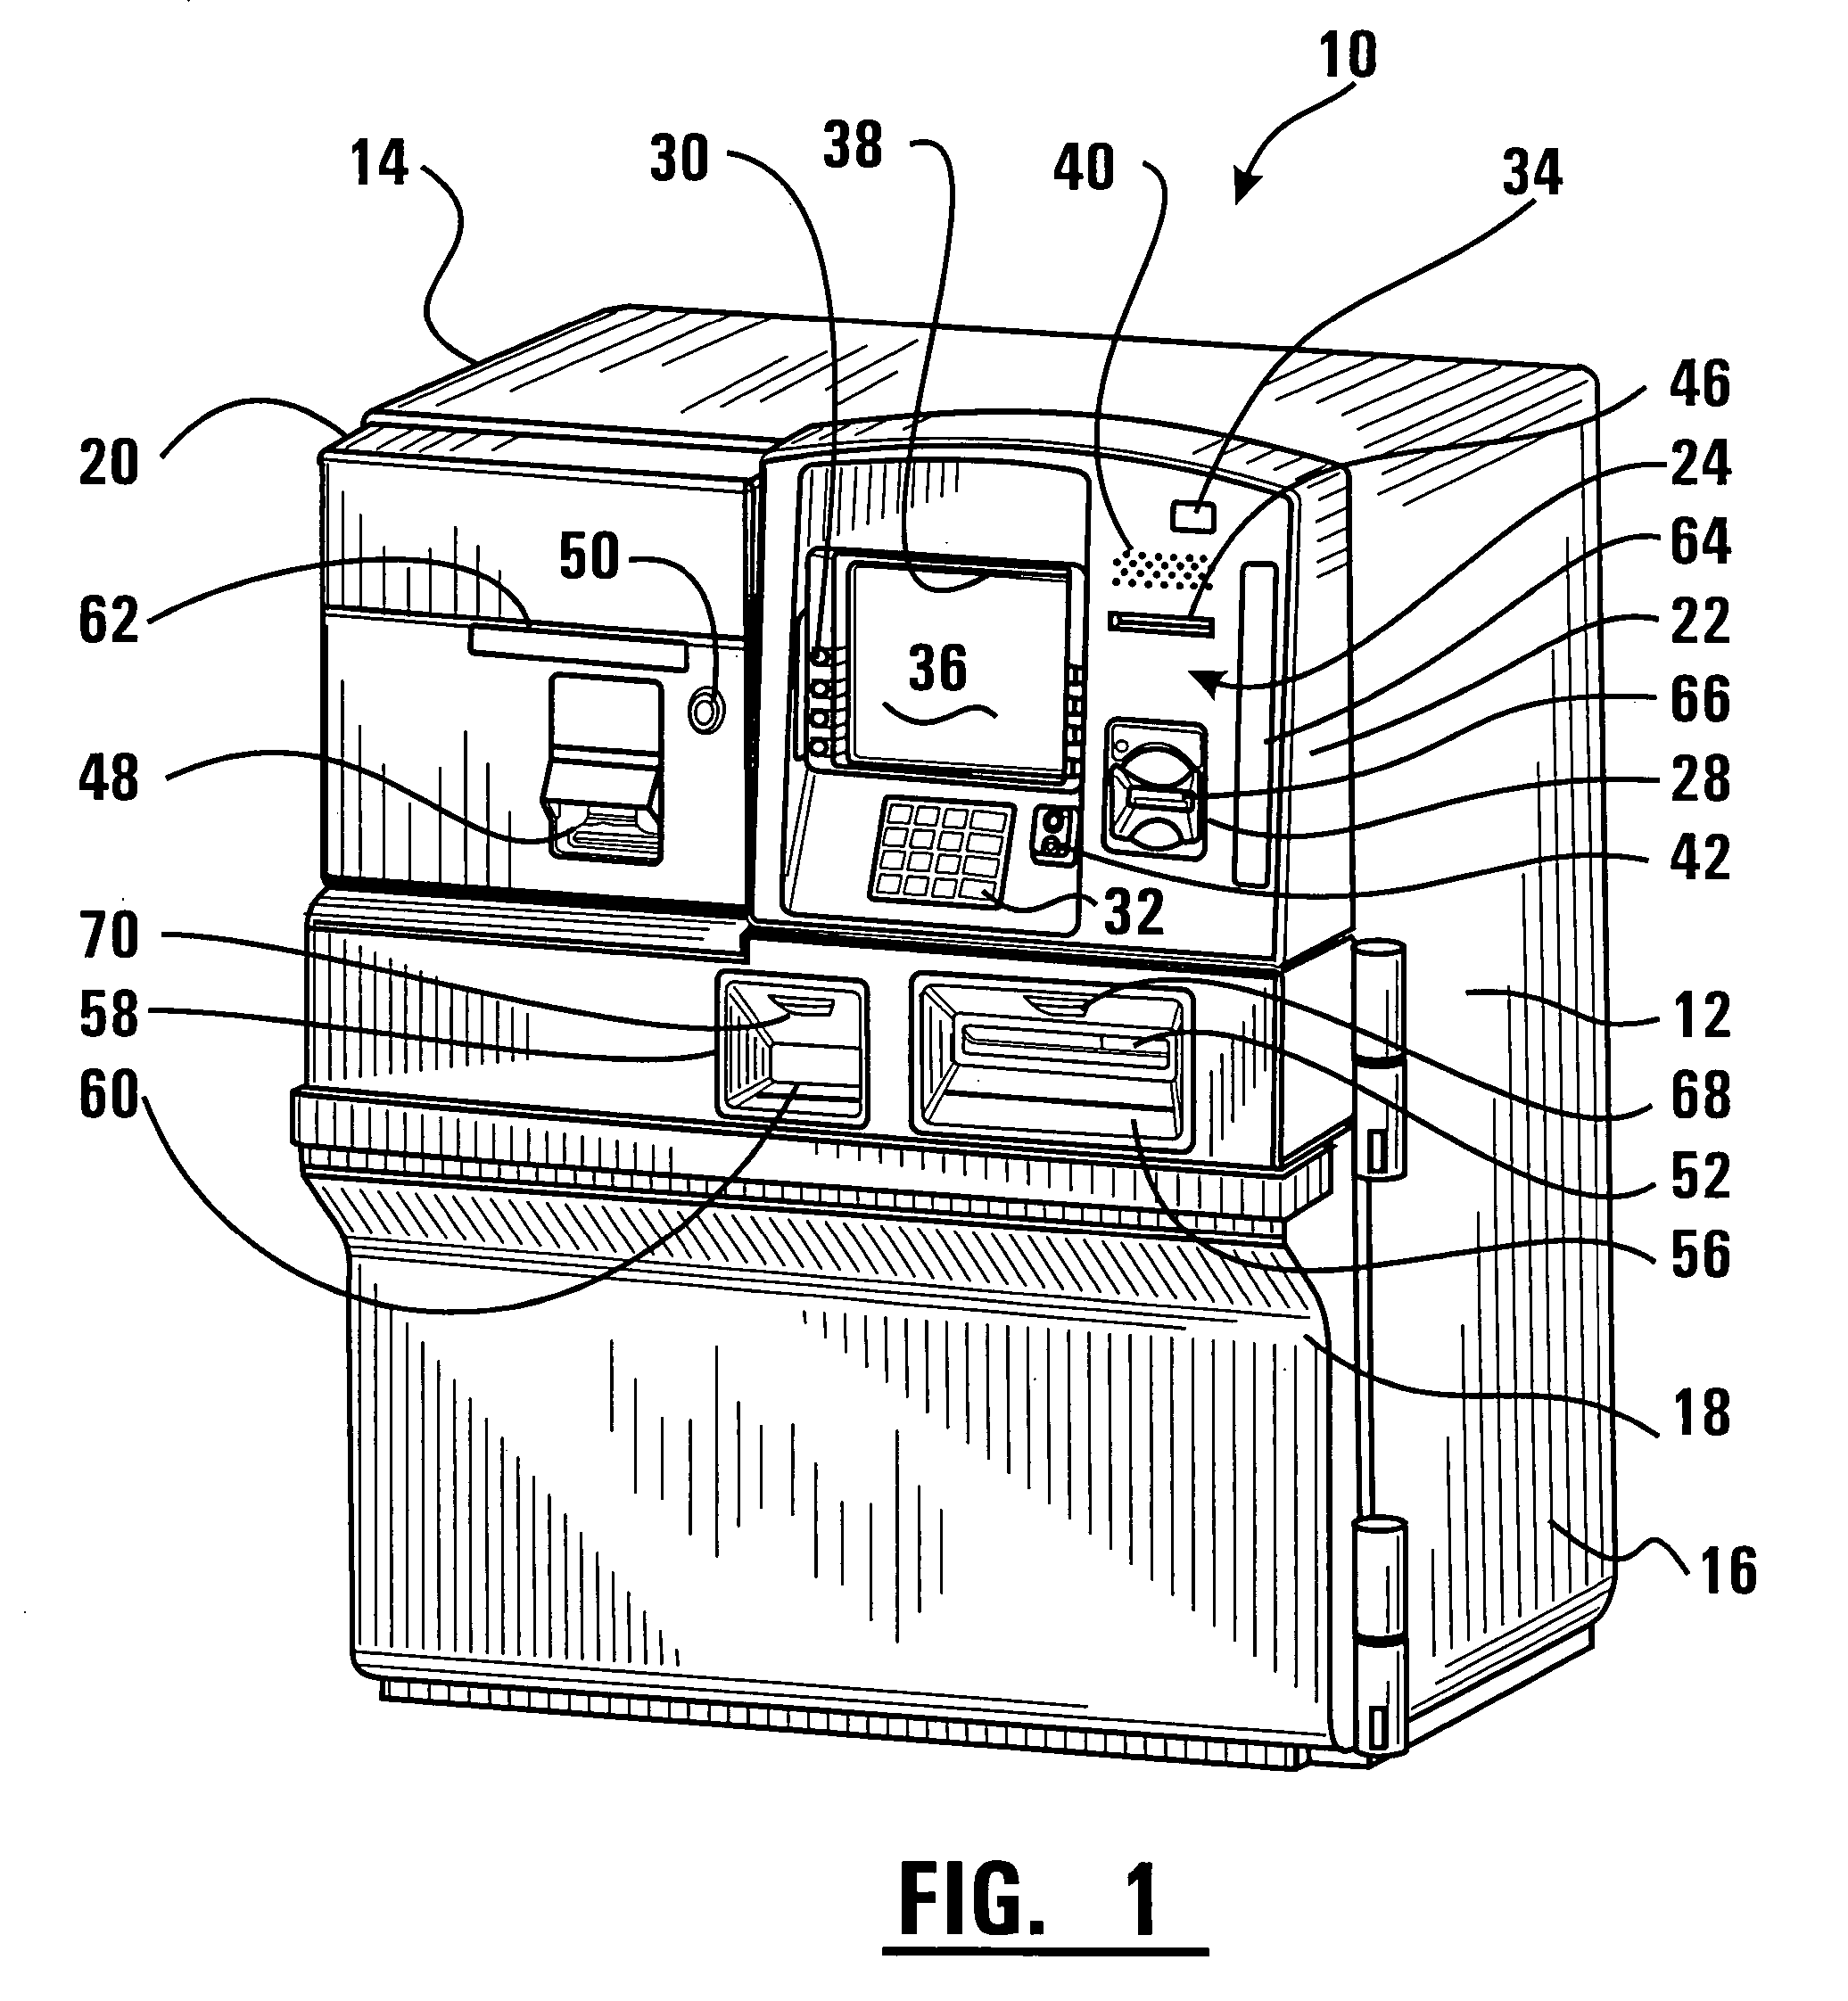 Cash dispensing automated banking machine diagnostic device